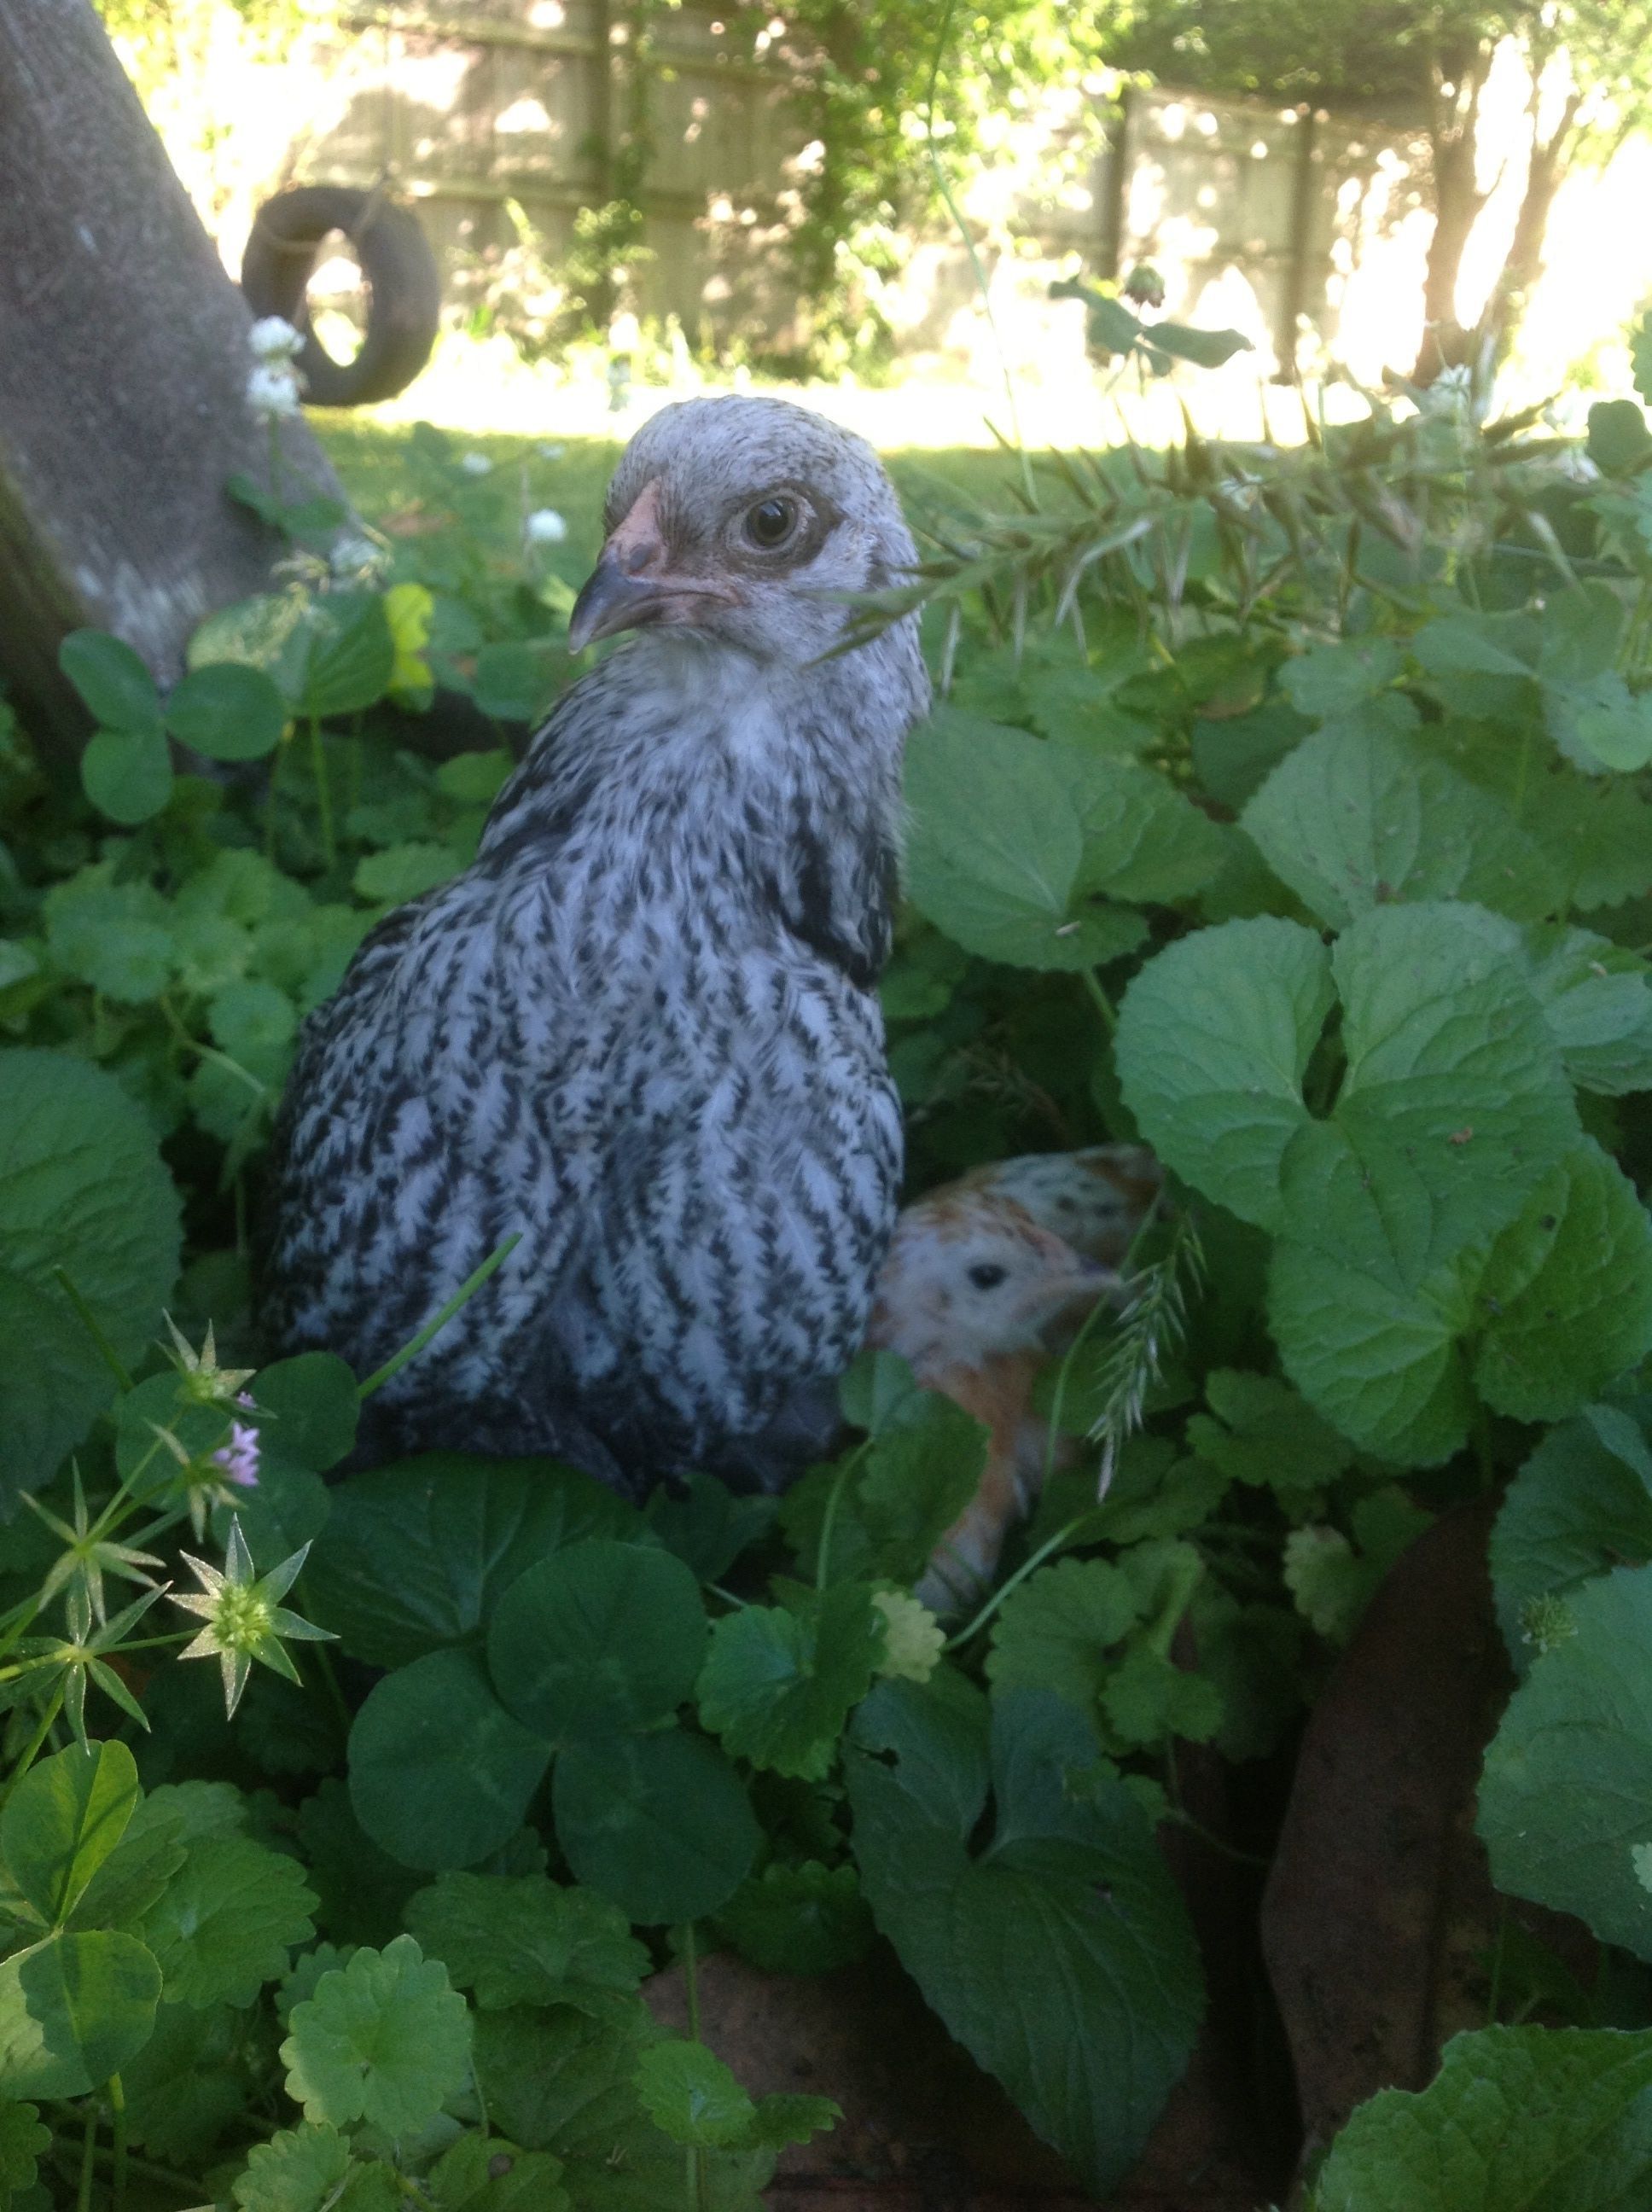 Keavy (green-eyed Brahma pullet)
Peanut & Butterscotch (calico Cochins with green eyes)